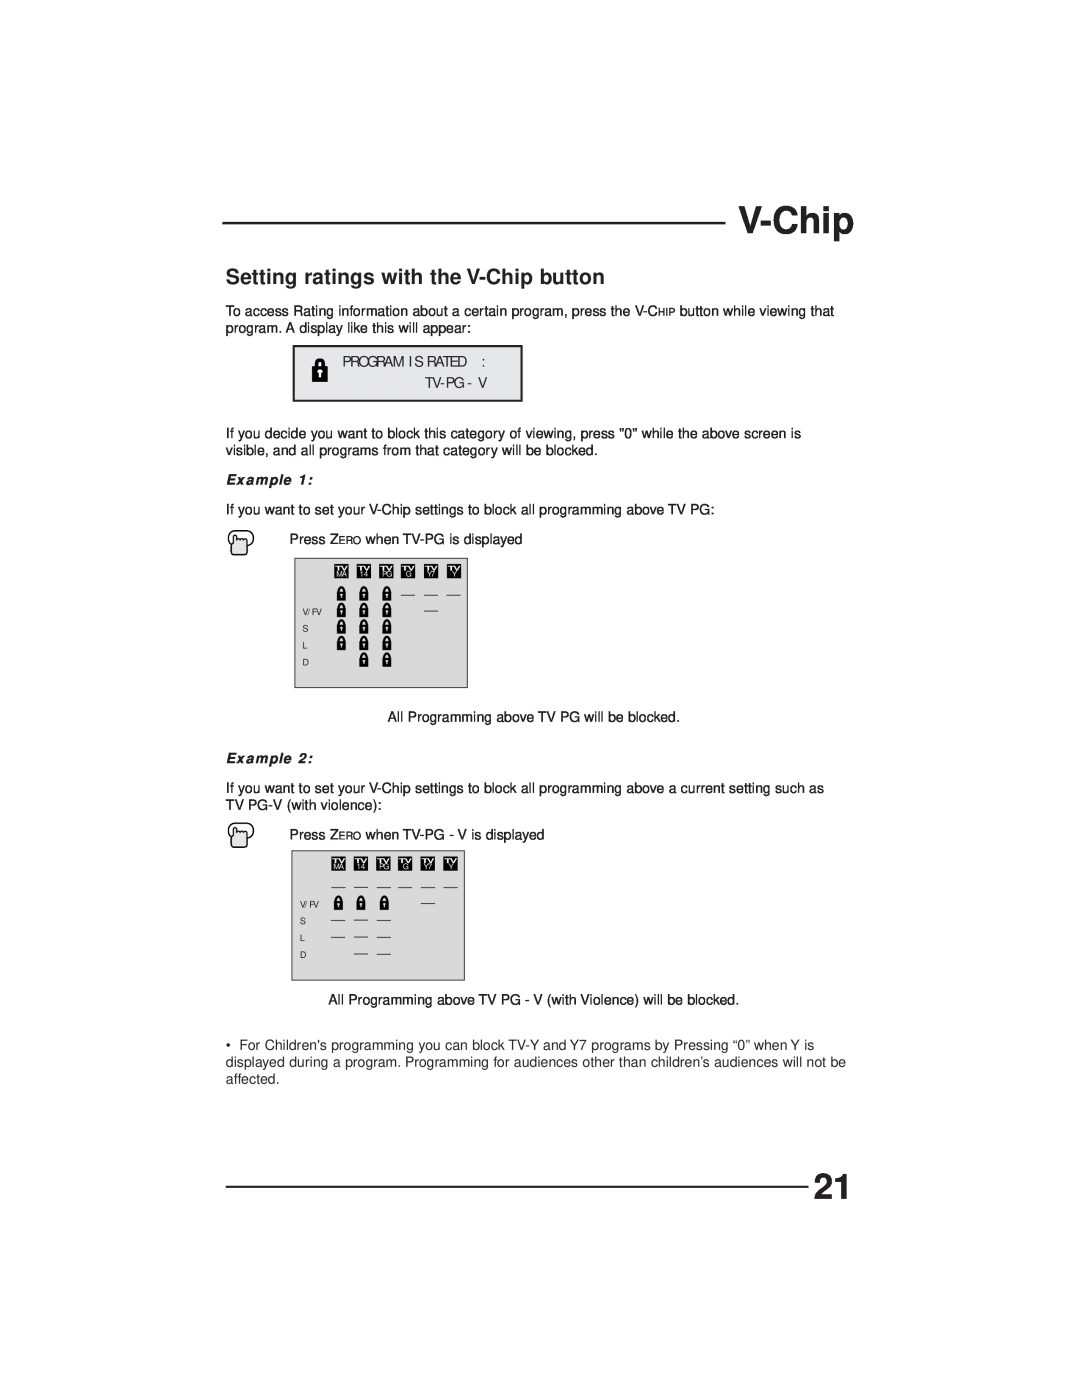 JVC AV-27GFH manual Setting ratings with the V-Chip button, Program Is Rated Tv-Pg, Example 